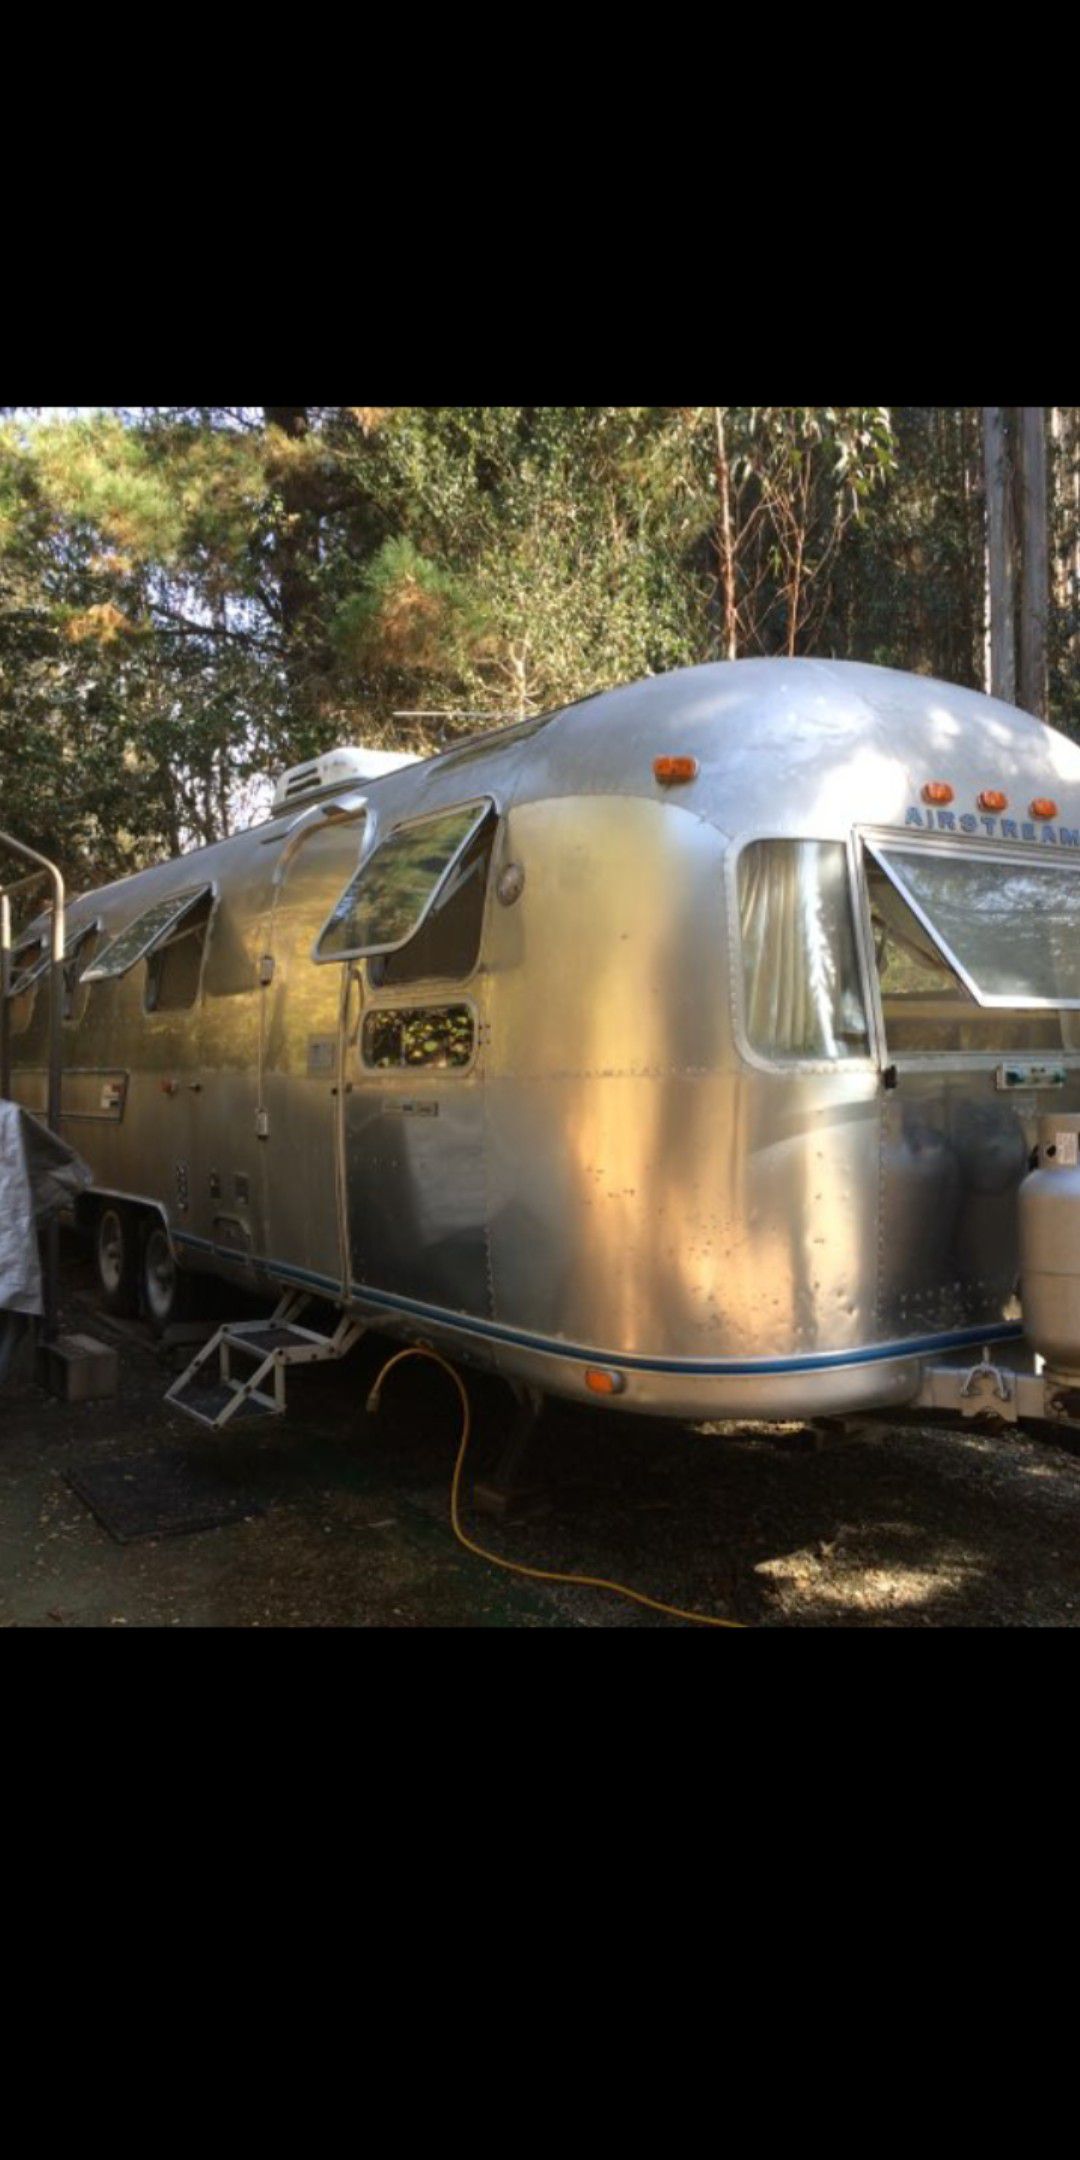 1976 Airstream land yacht 31 feet current registration clean title solid trailer